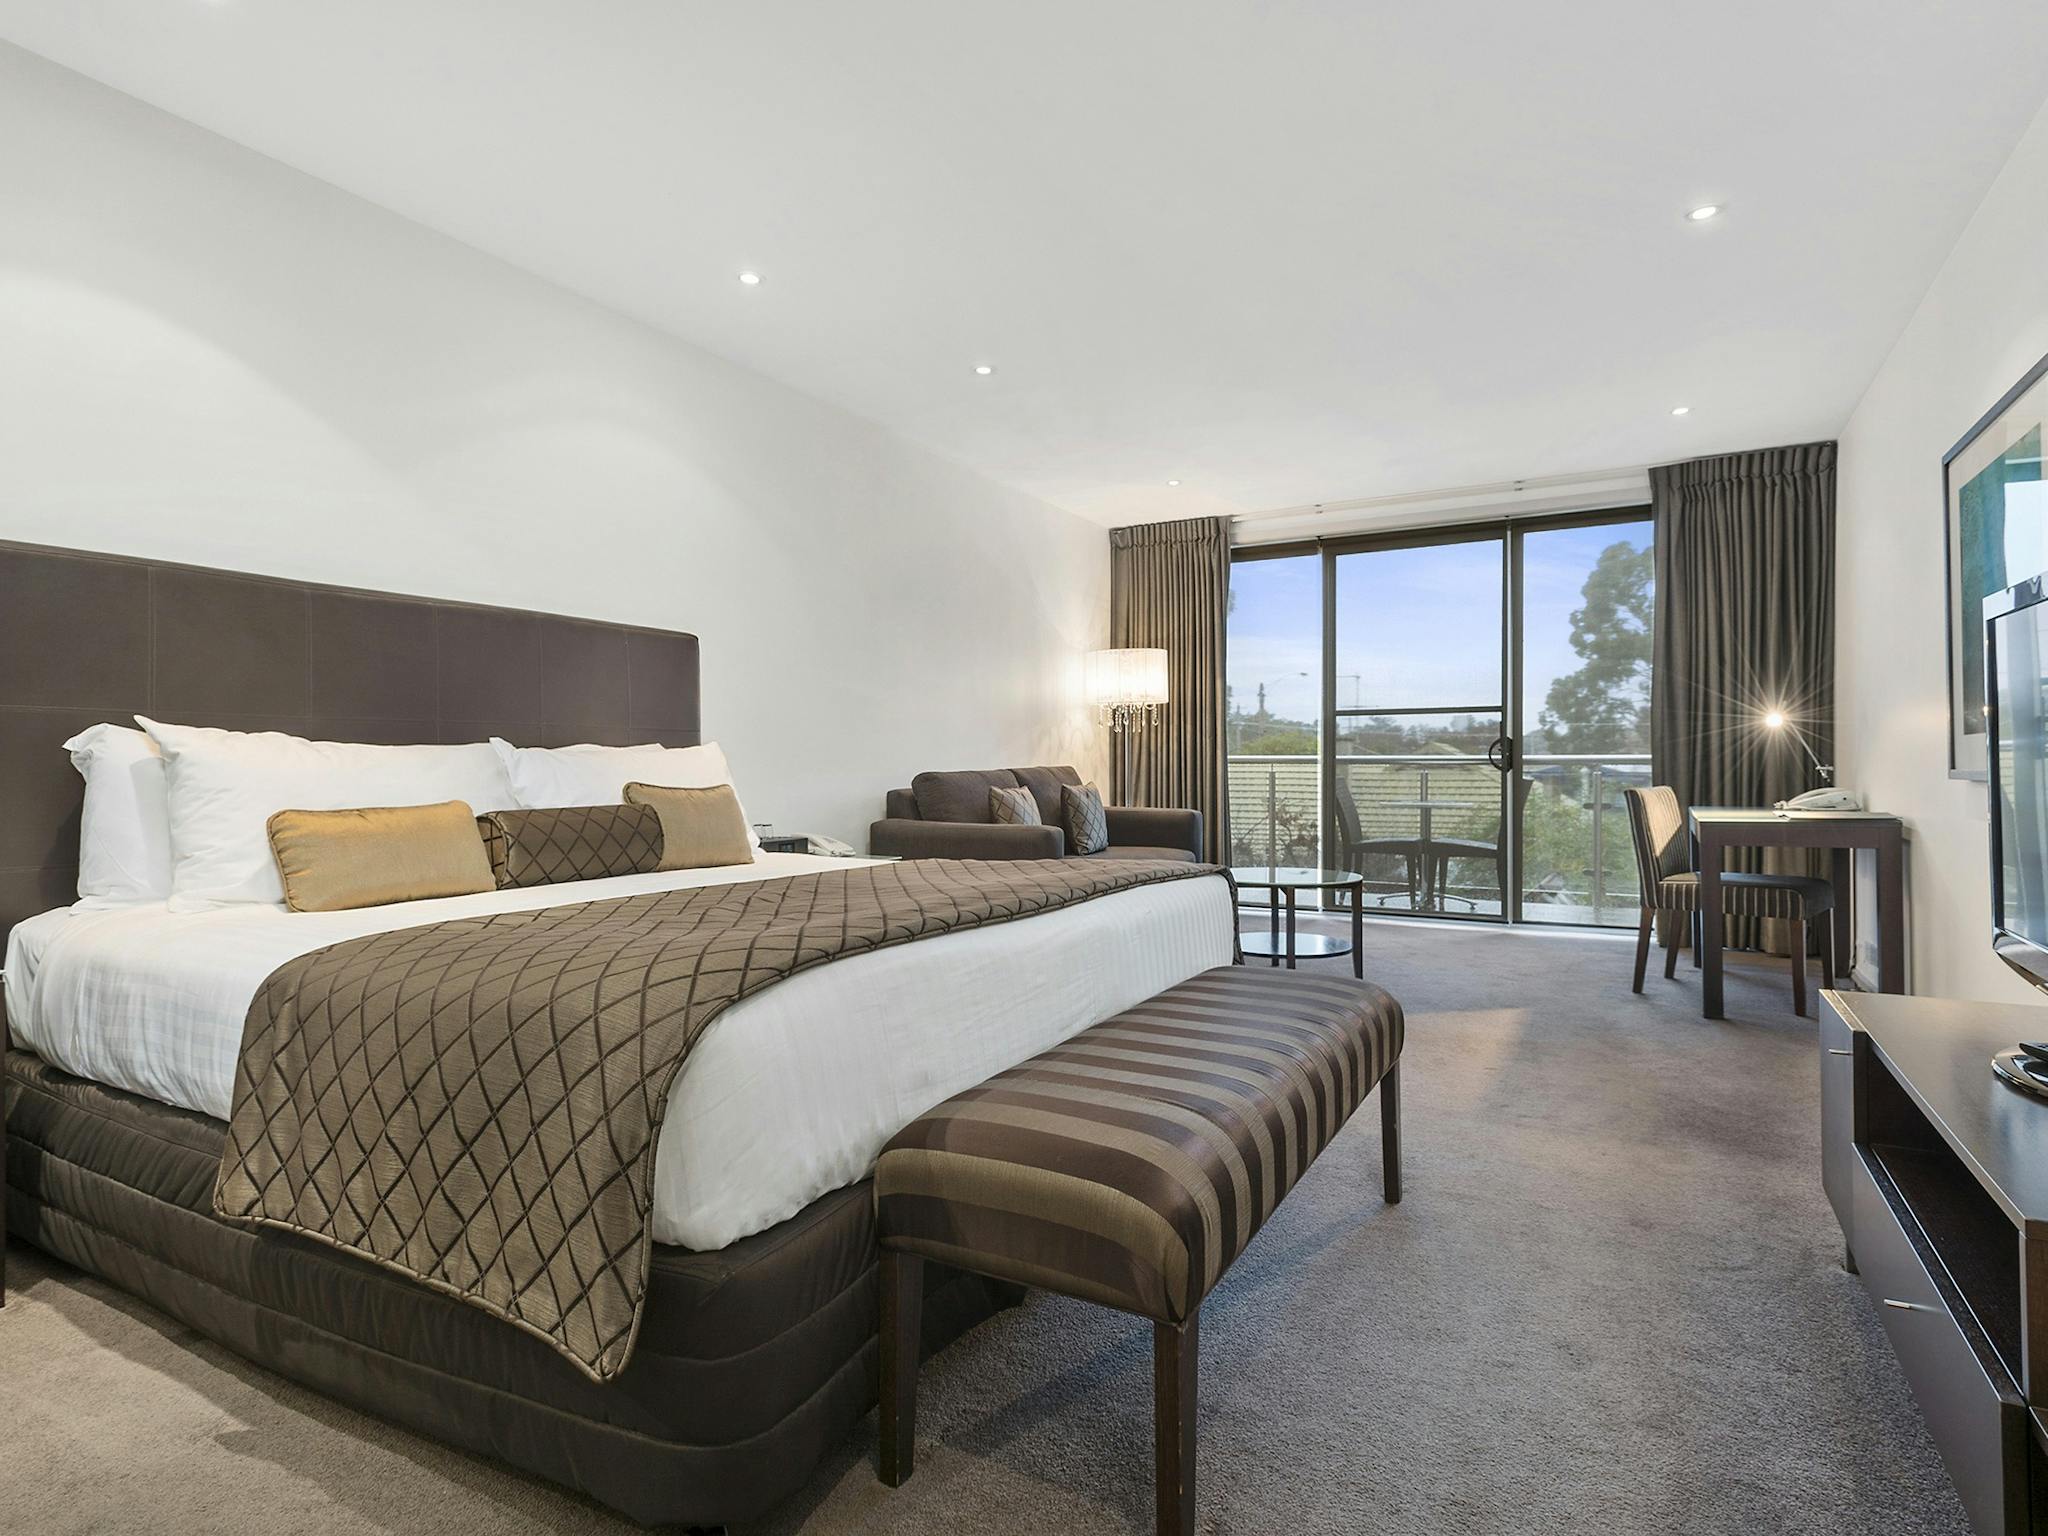 The Gateway's King Suites offer views of treetops from your private balcony